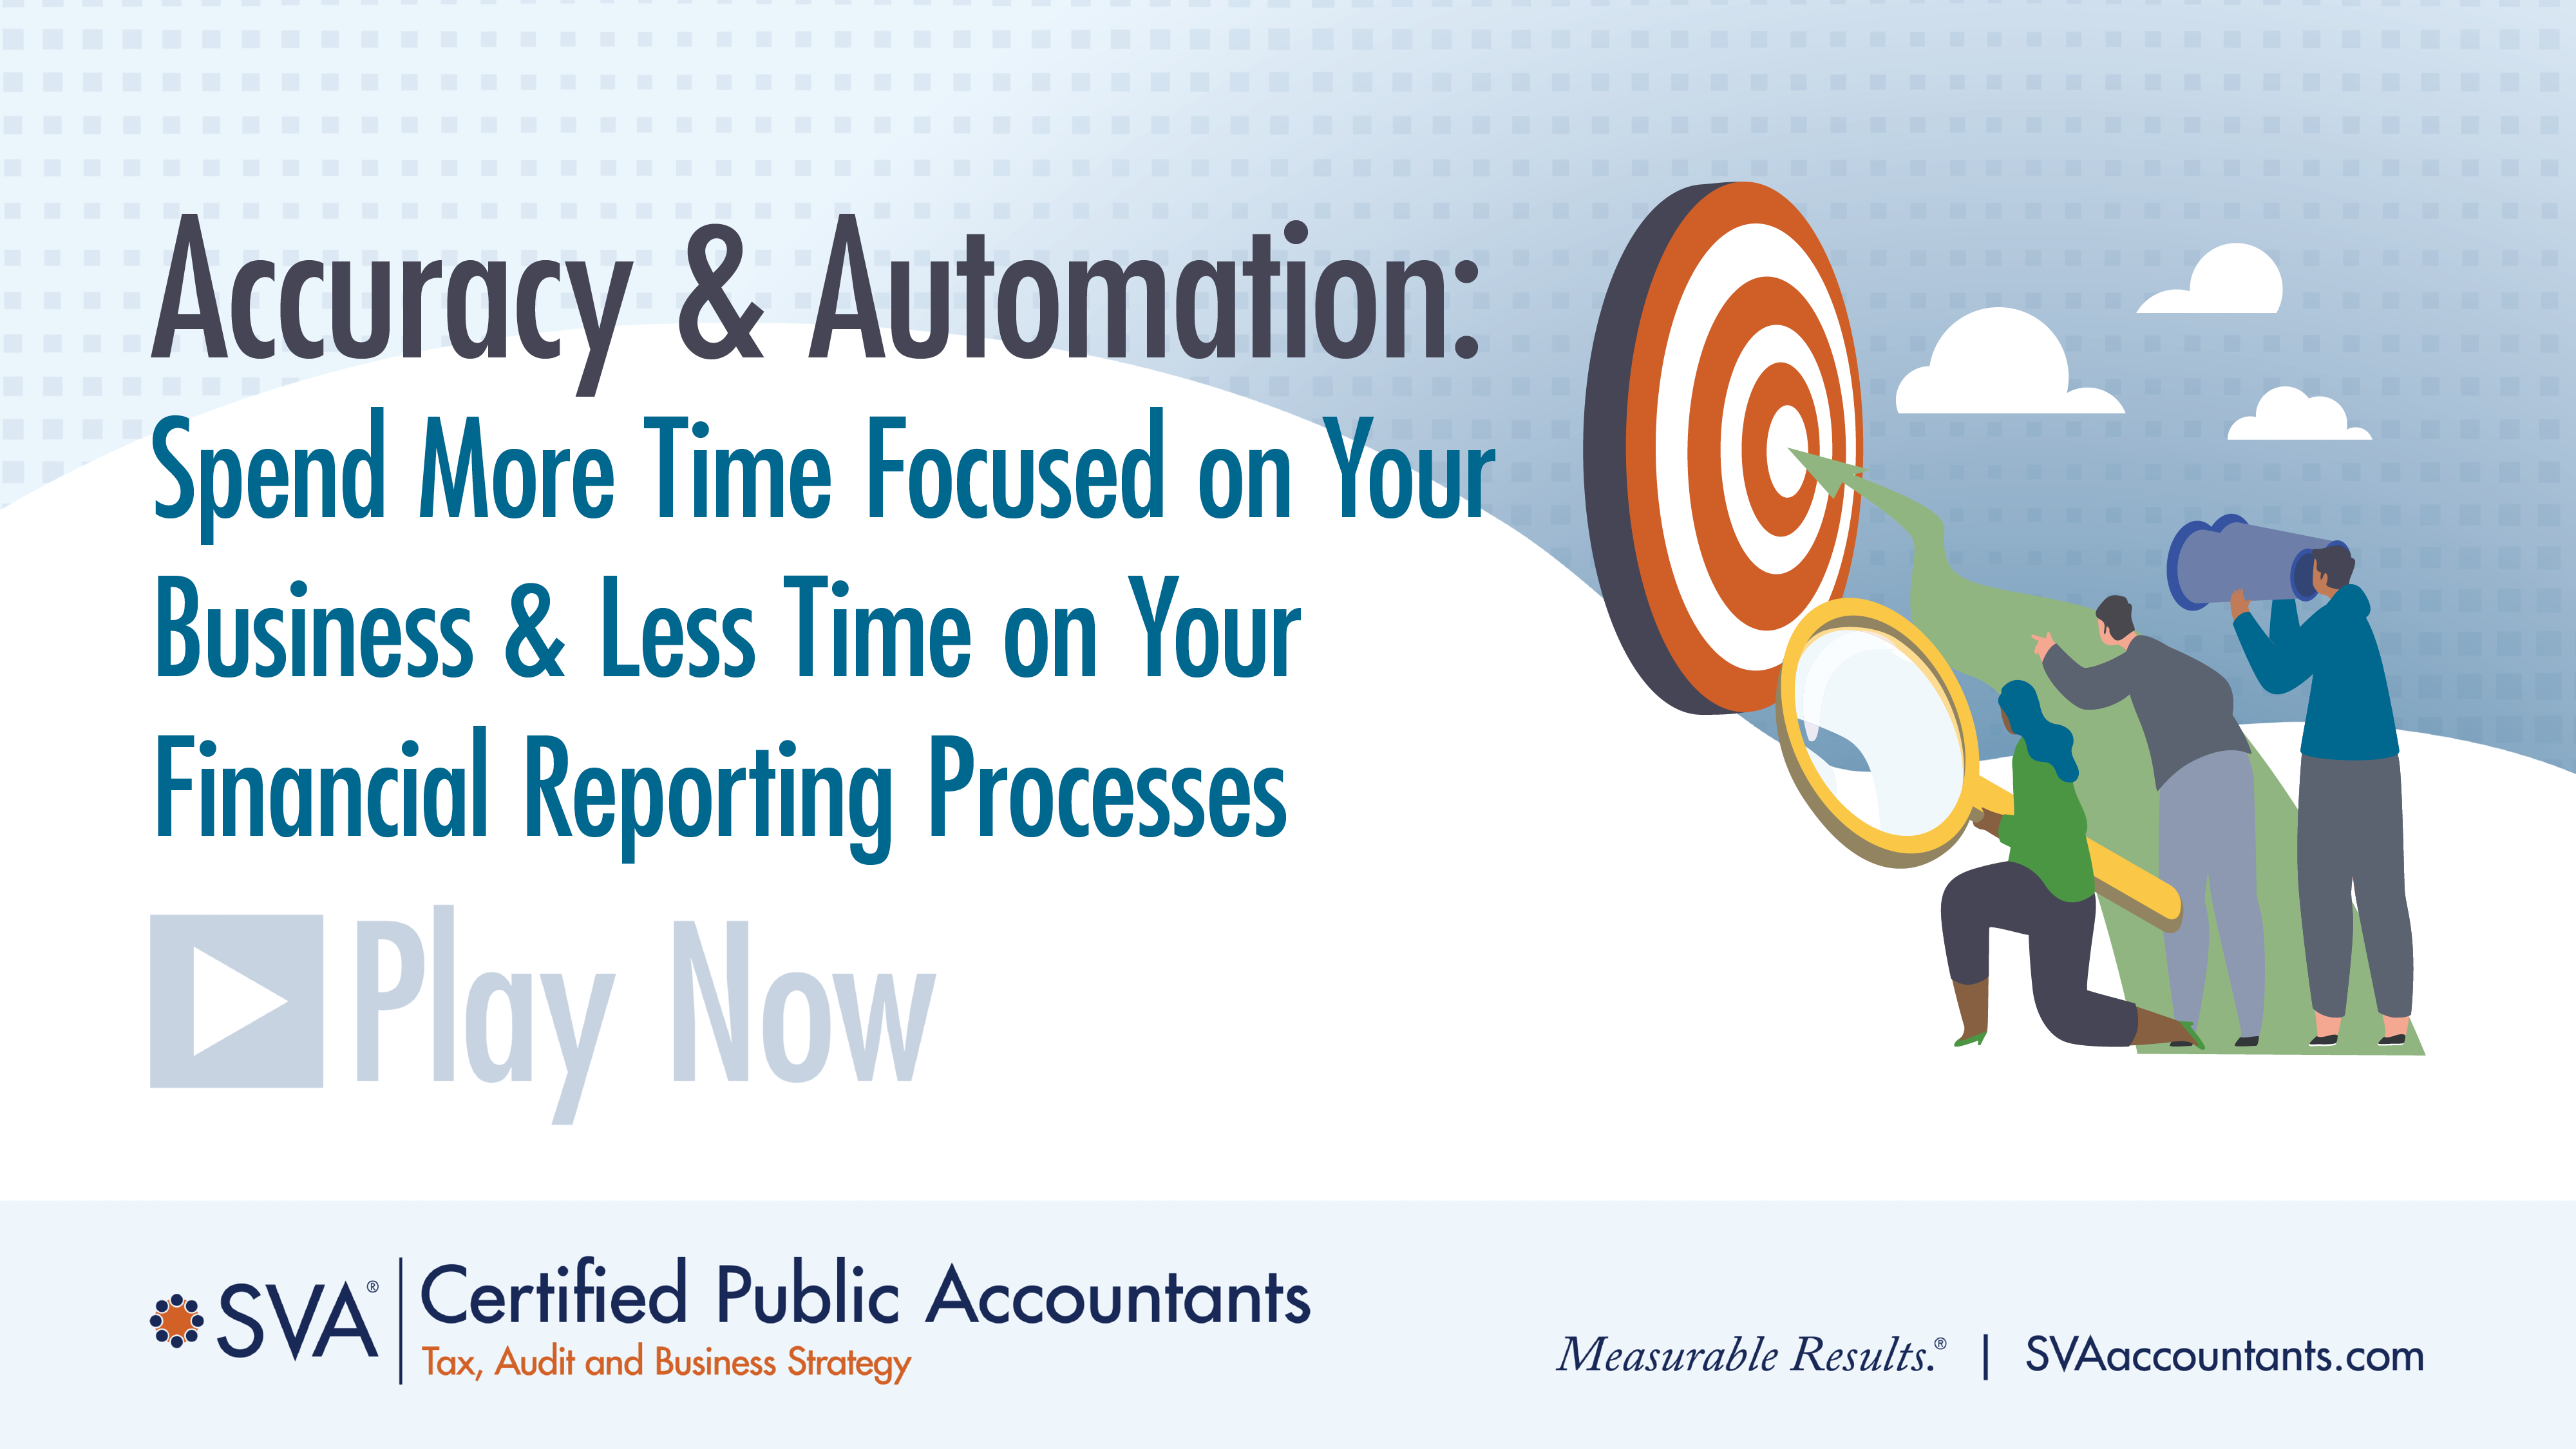 Accuracy & Automation: Spend More Time Focused on Your Business & Less Time on Your Financial Reporting Processes